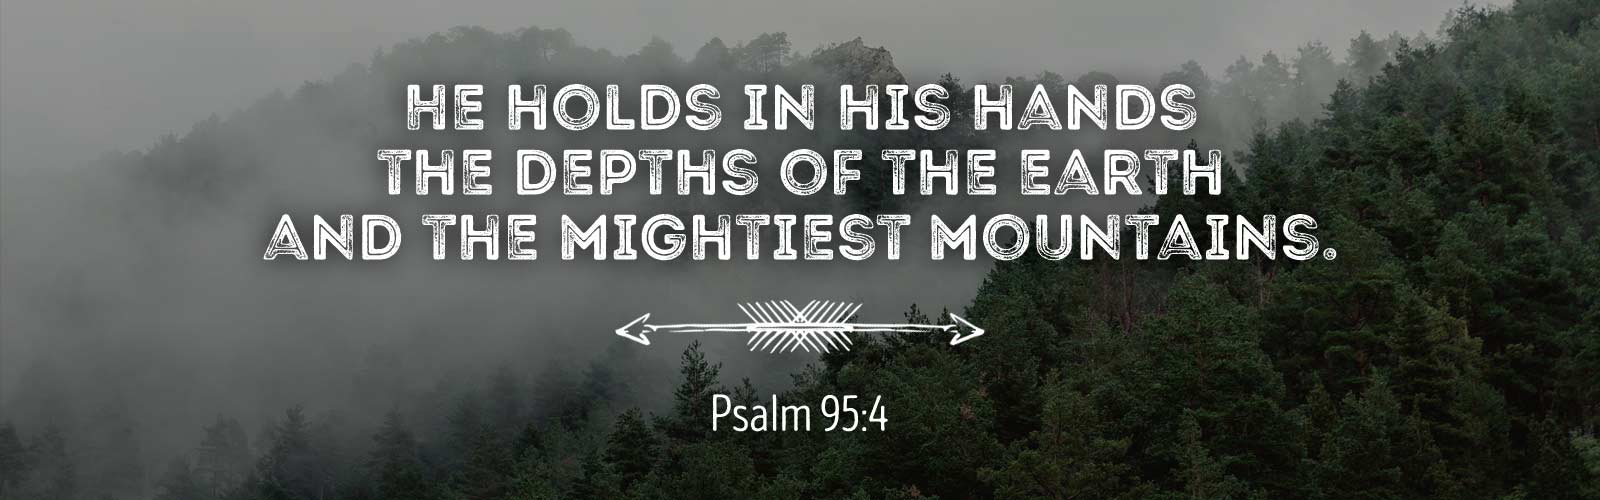 God holds the mountains in His hands.